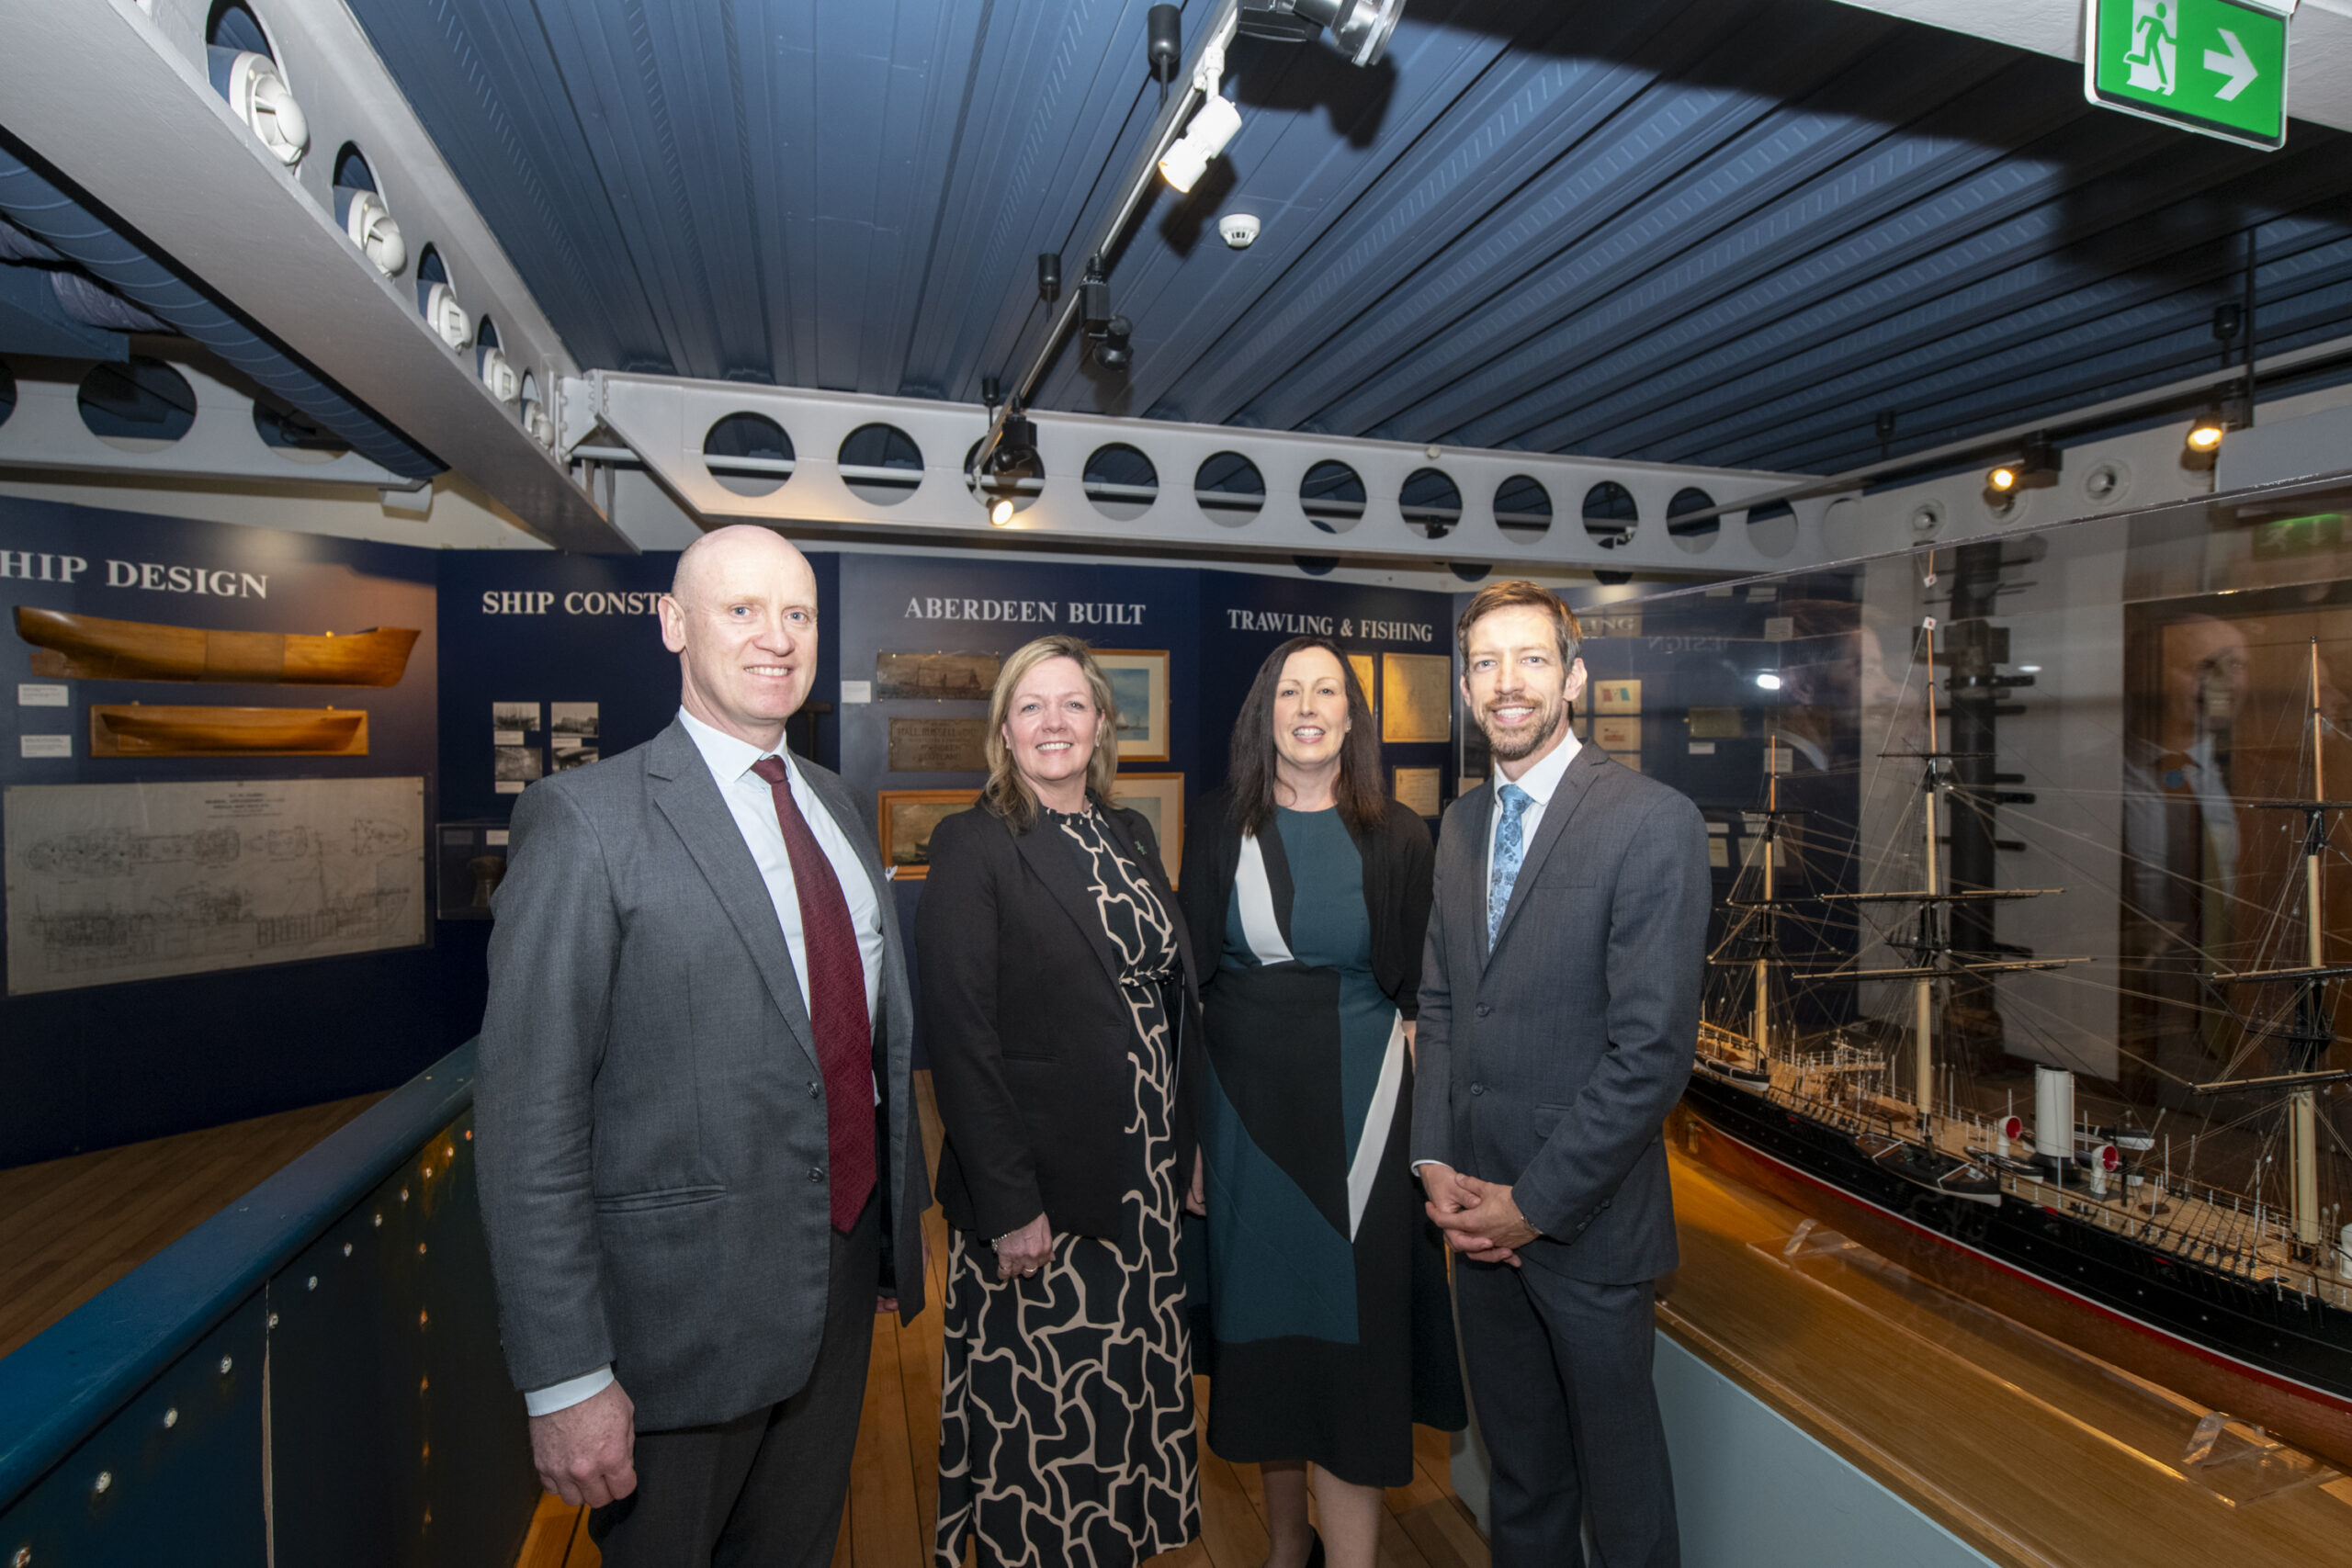 Image of Alex Cousins, Connected Places Catapult, Harry O'Rahilly, British Embassy Dublin, Michelle St Clair, British Embassy, Dublin and Cllr John Alexander, Leader, Dundee City Council and Chair, Scottish Cities Alliance